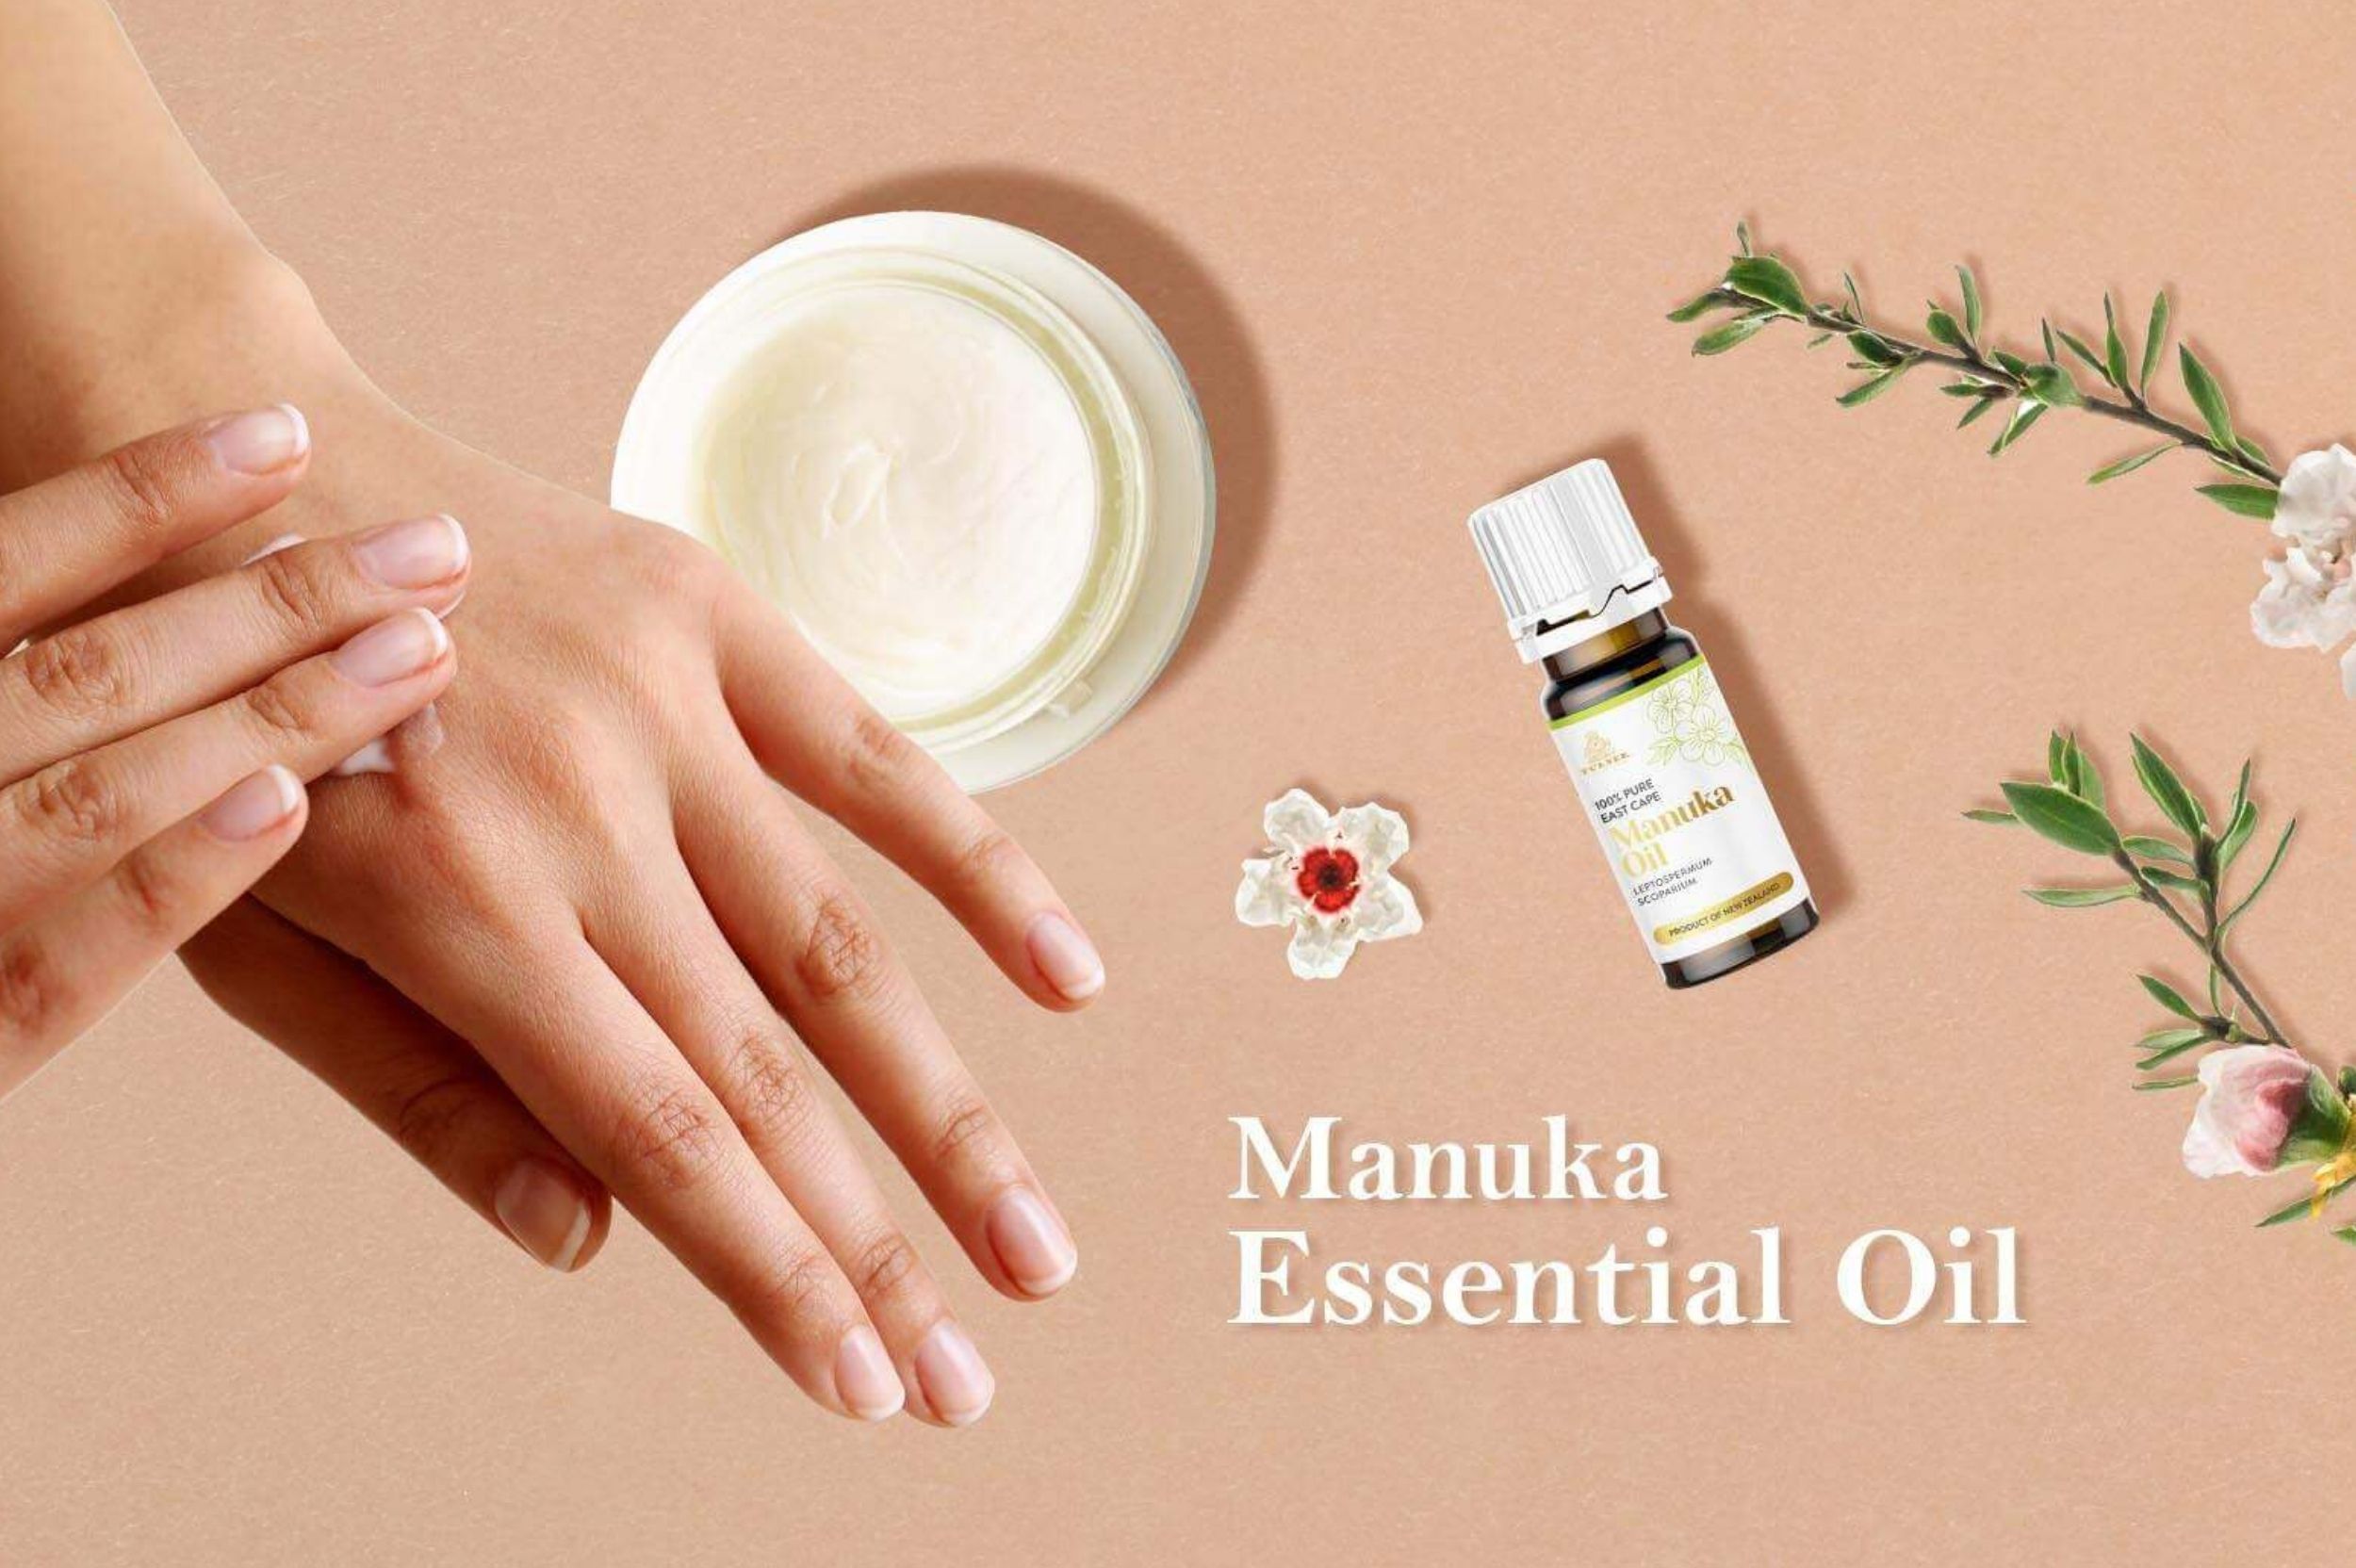 Manuka Oil 101: Your Complete Guide on Manuka Essential Oil - TURNER New Zealand